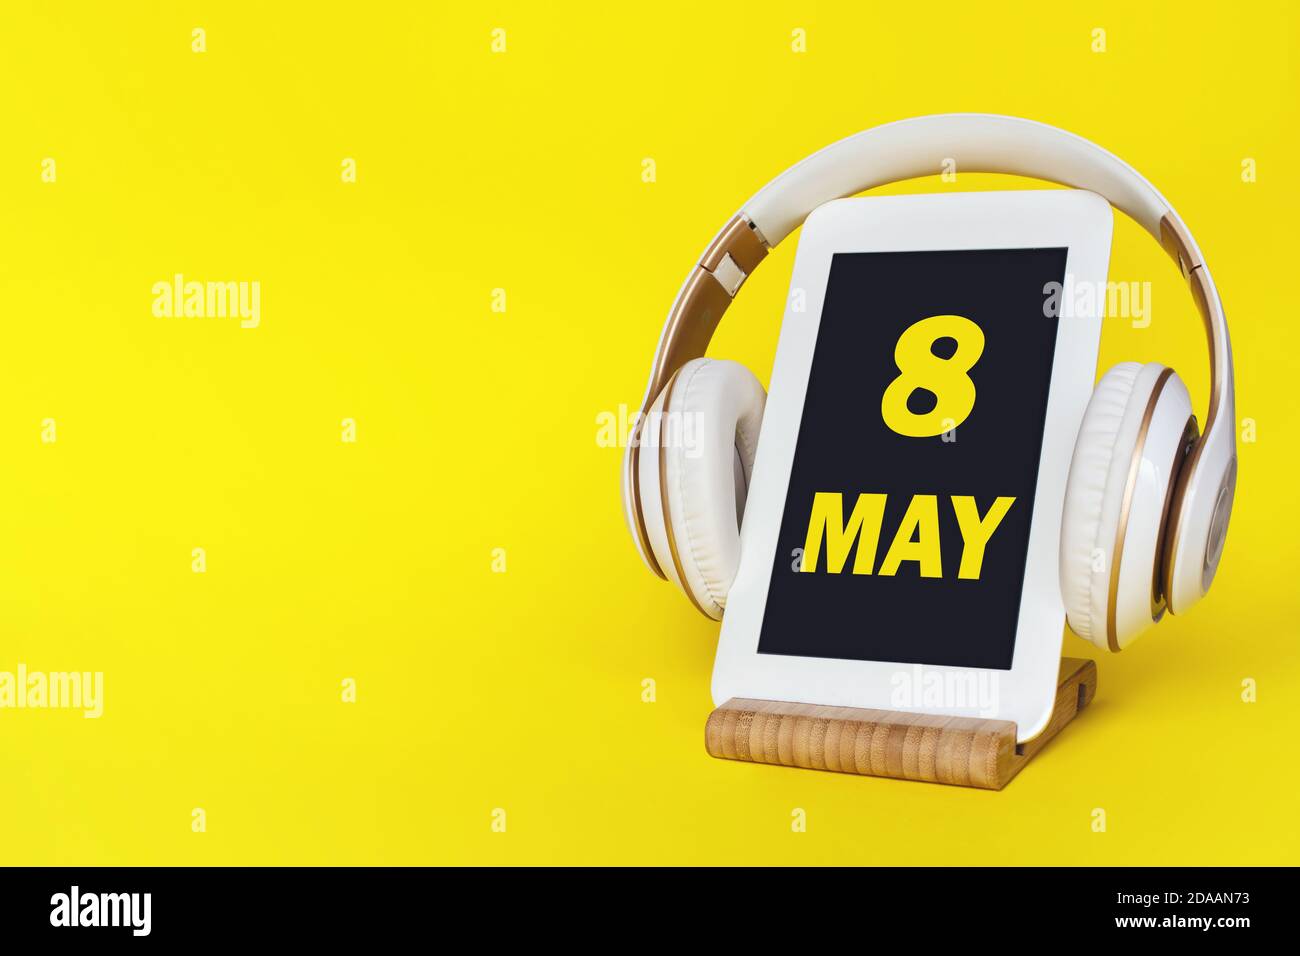 May 8th. Day 8 of month, Calendar date. Stylish headphones and modern tablet on yellow background. Space for text. Concept education, technology, life Stock Photo